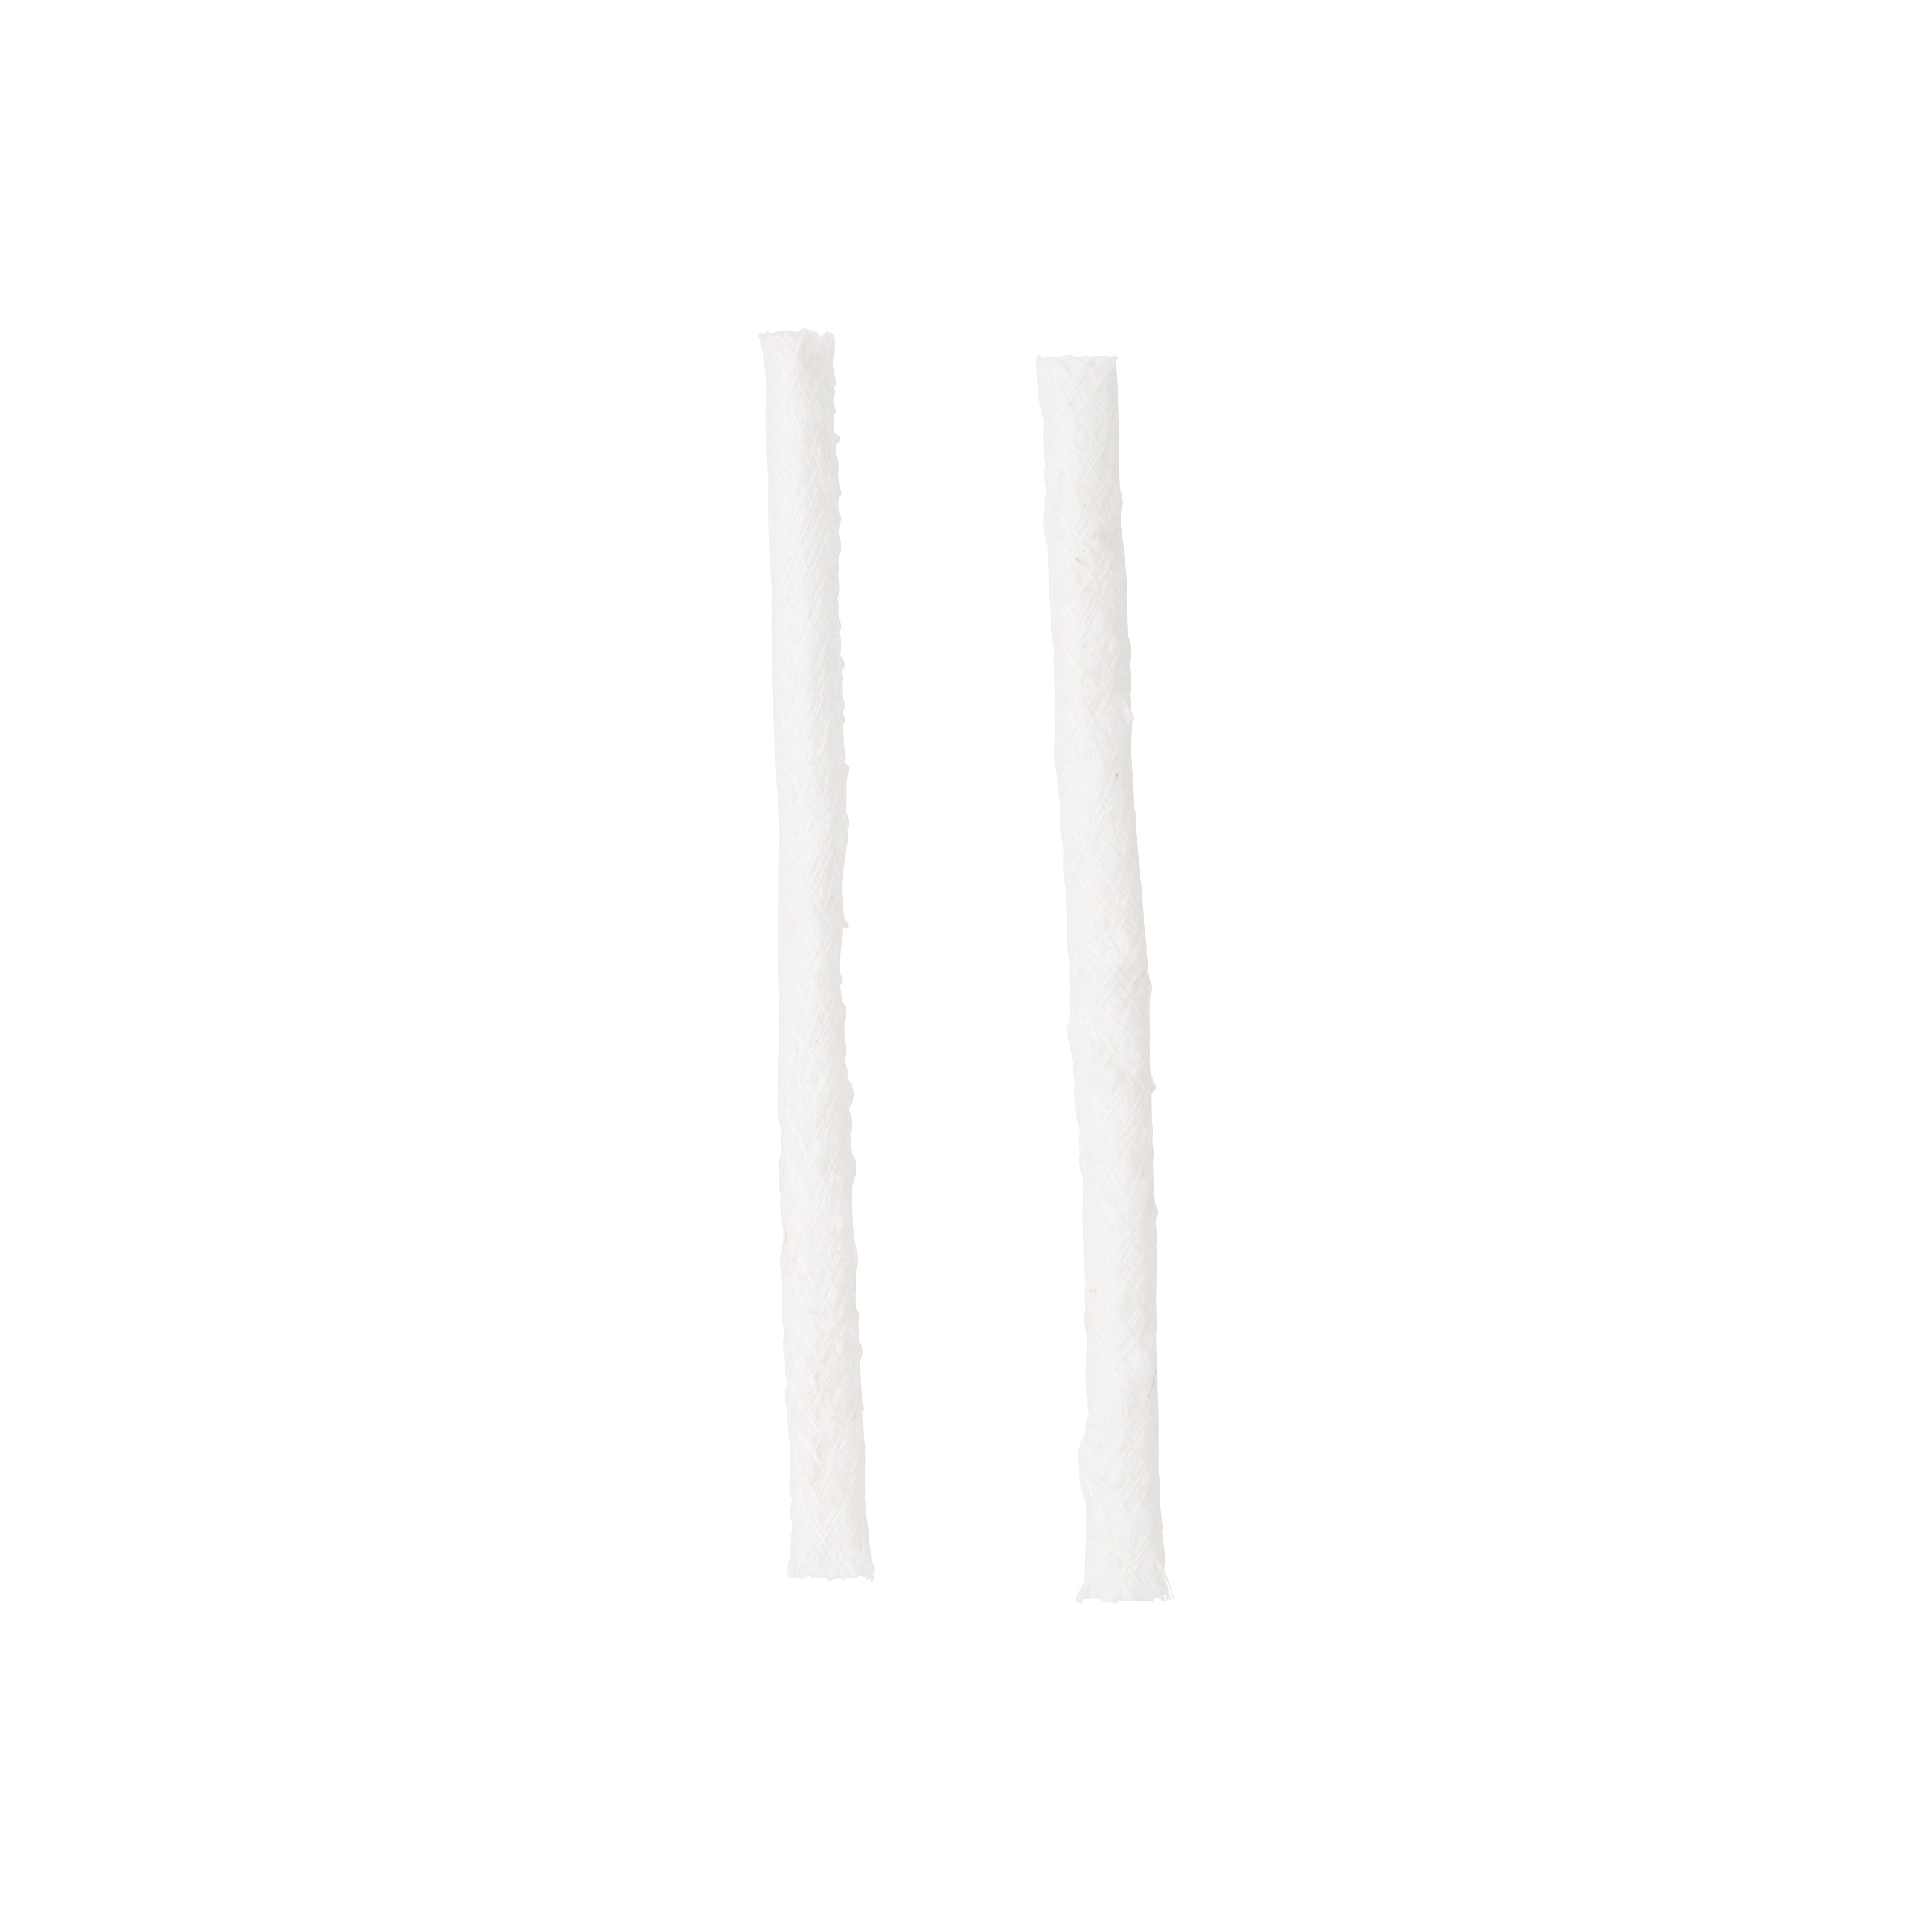 GB-LW9-3L Torch Replacement Wick, Fiberglass, White, For: Outdoor